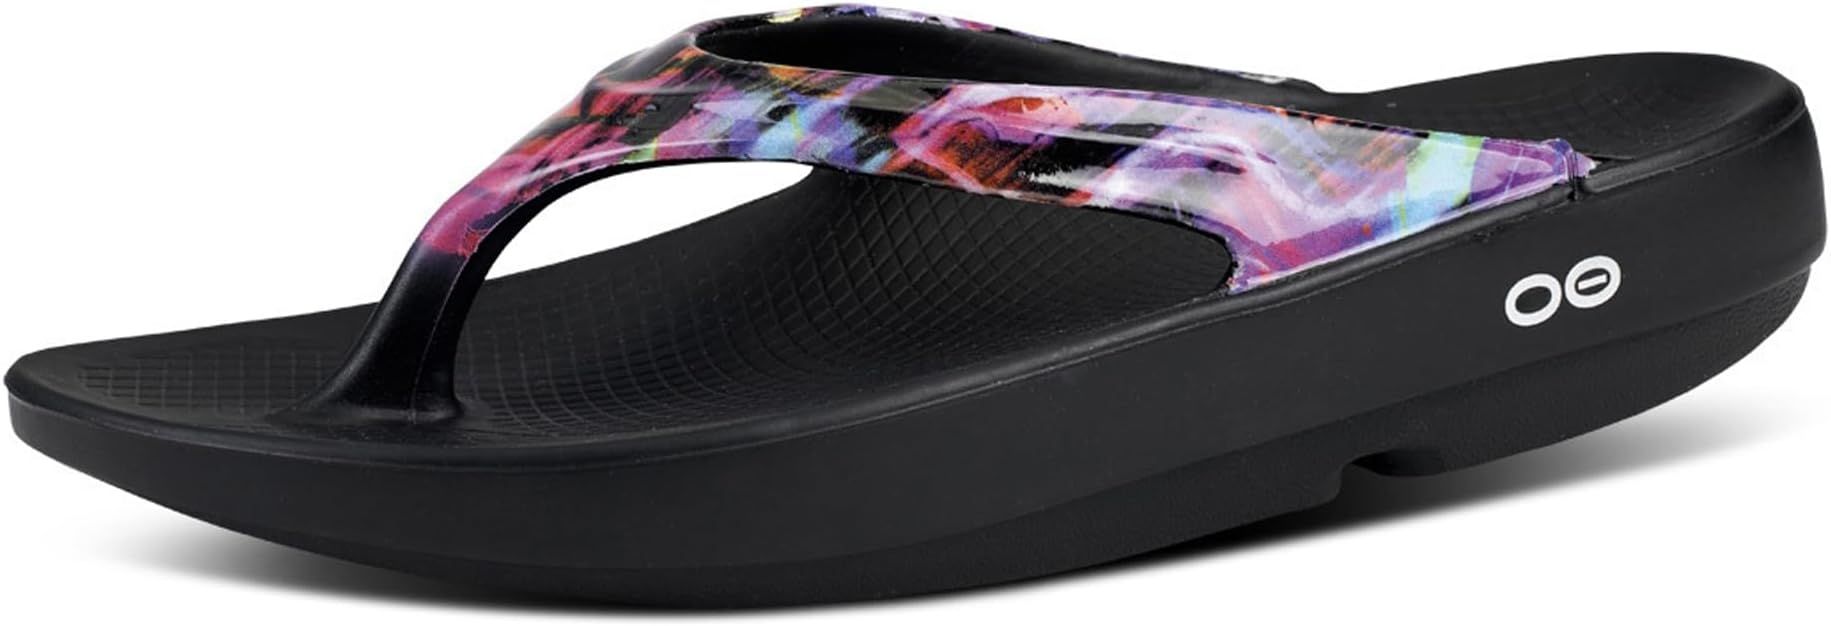 OOFOS OOlala Luxe Sandal - Lightweight Recovery Footwear - Reduces Stress on Feet, Joints & Back ... | Amazon (US)